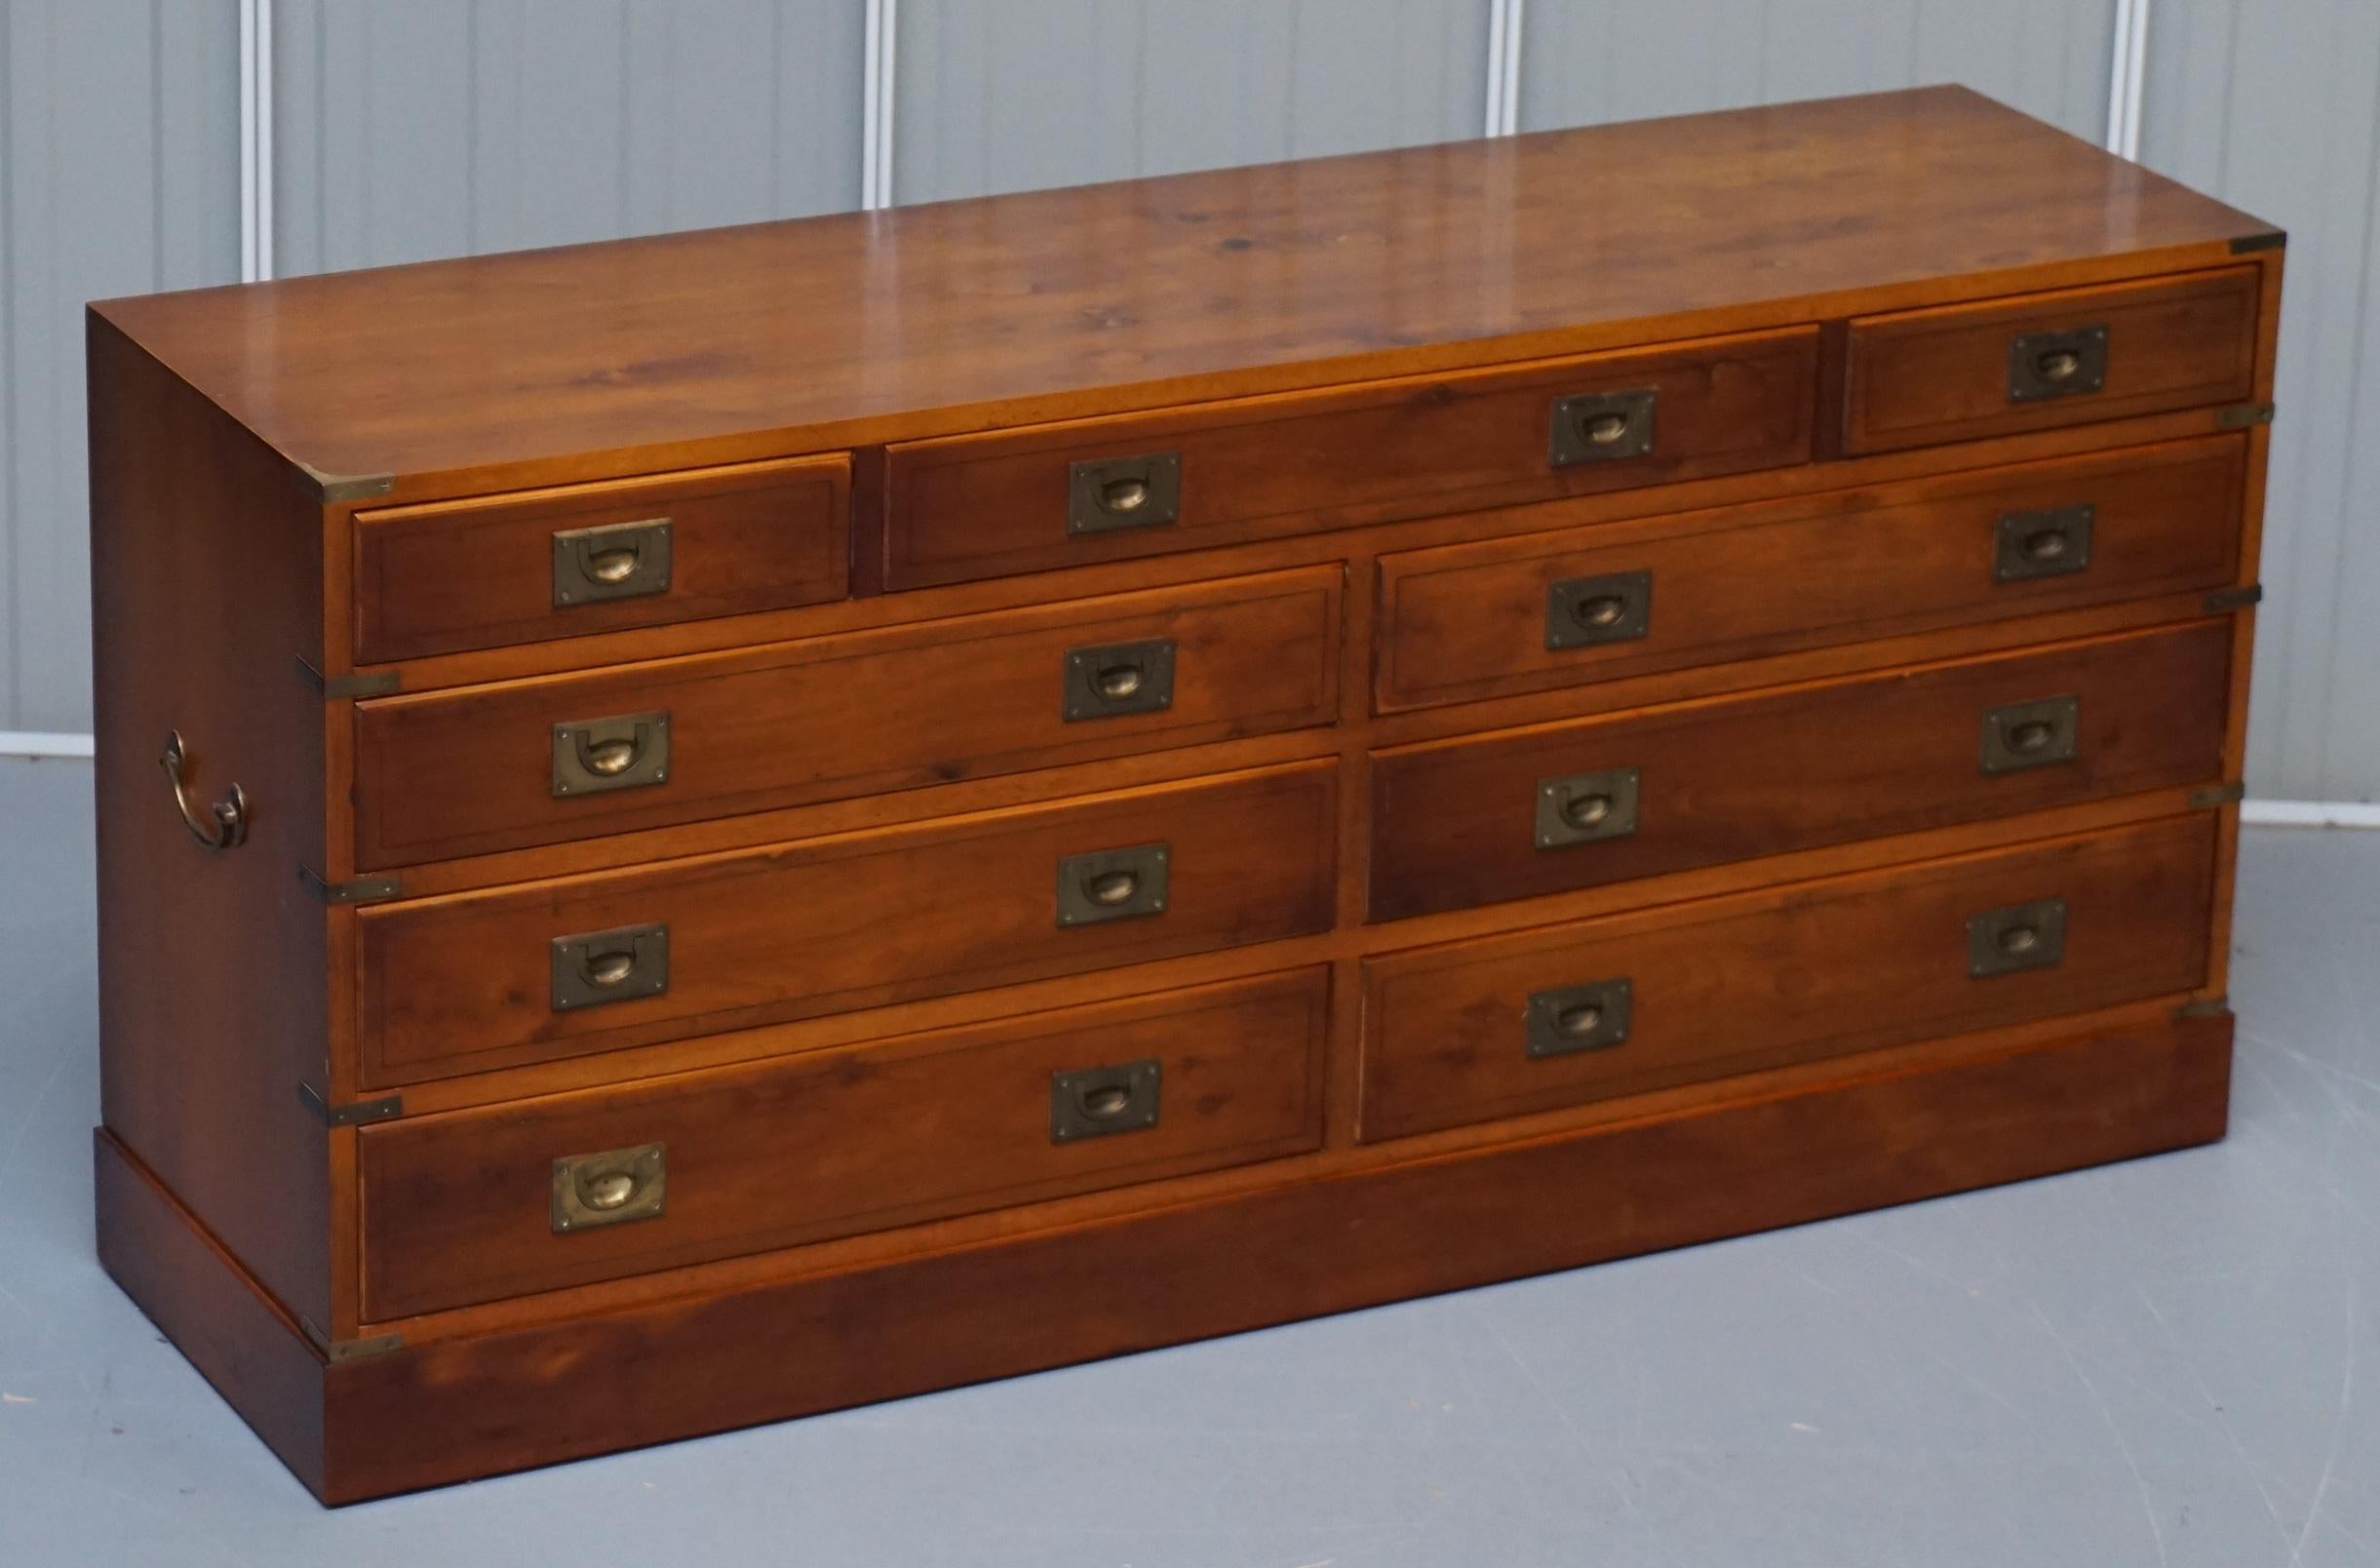 We are delighted to offer for sale this lovely lightly burred yew wood Military Campaign sideboard chest of drawers

A very good looking well made and desirable vintage sideboard, the Military Campaign style is a finish that will never go out of